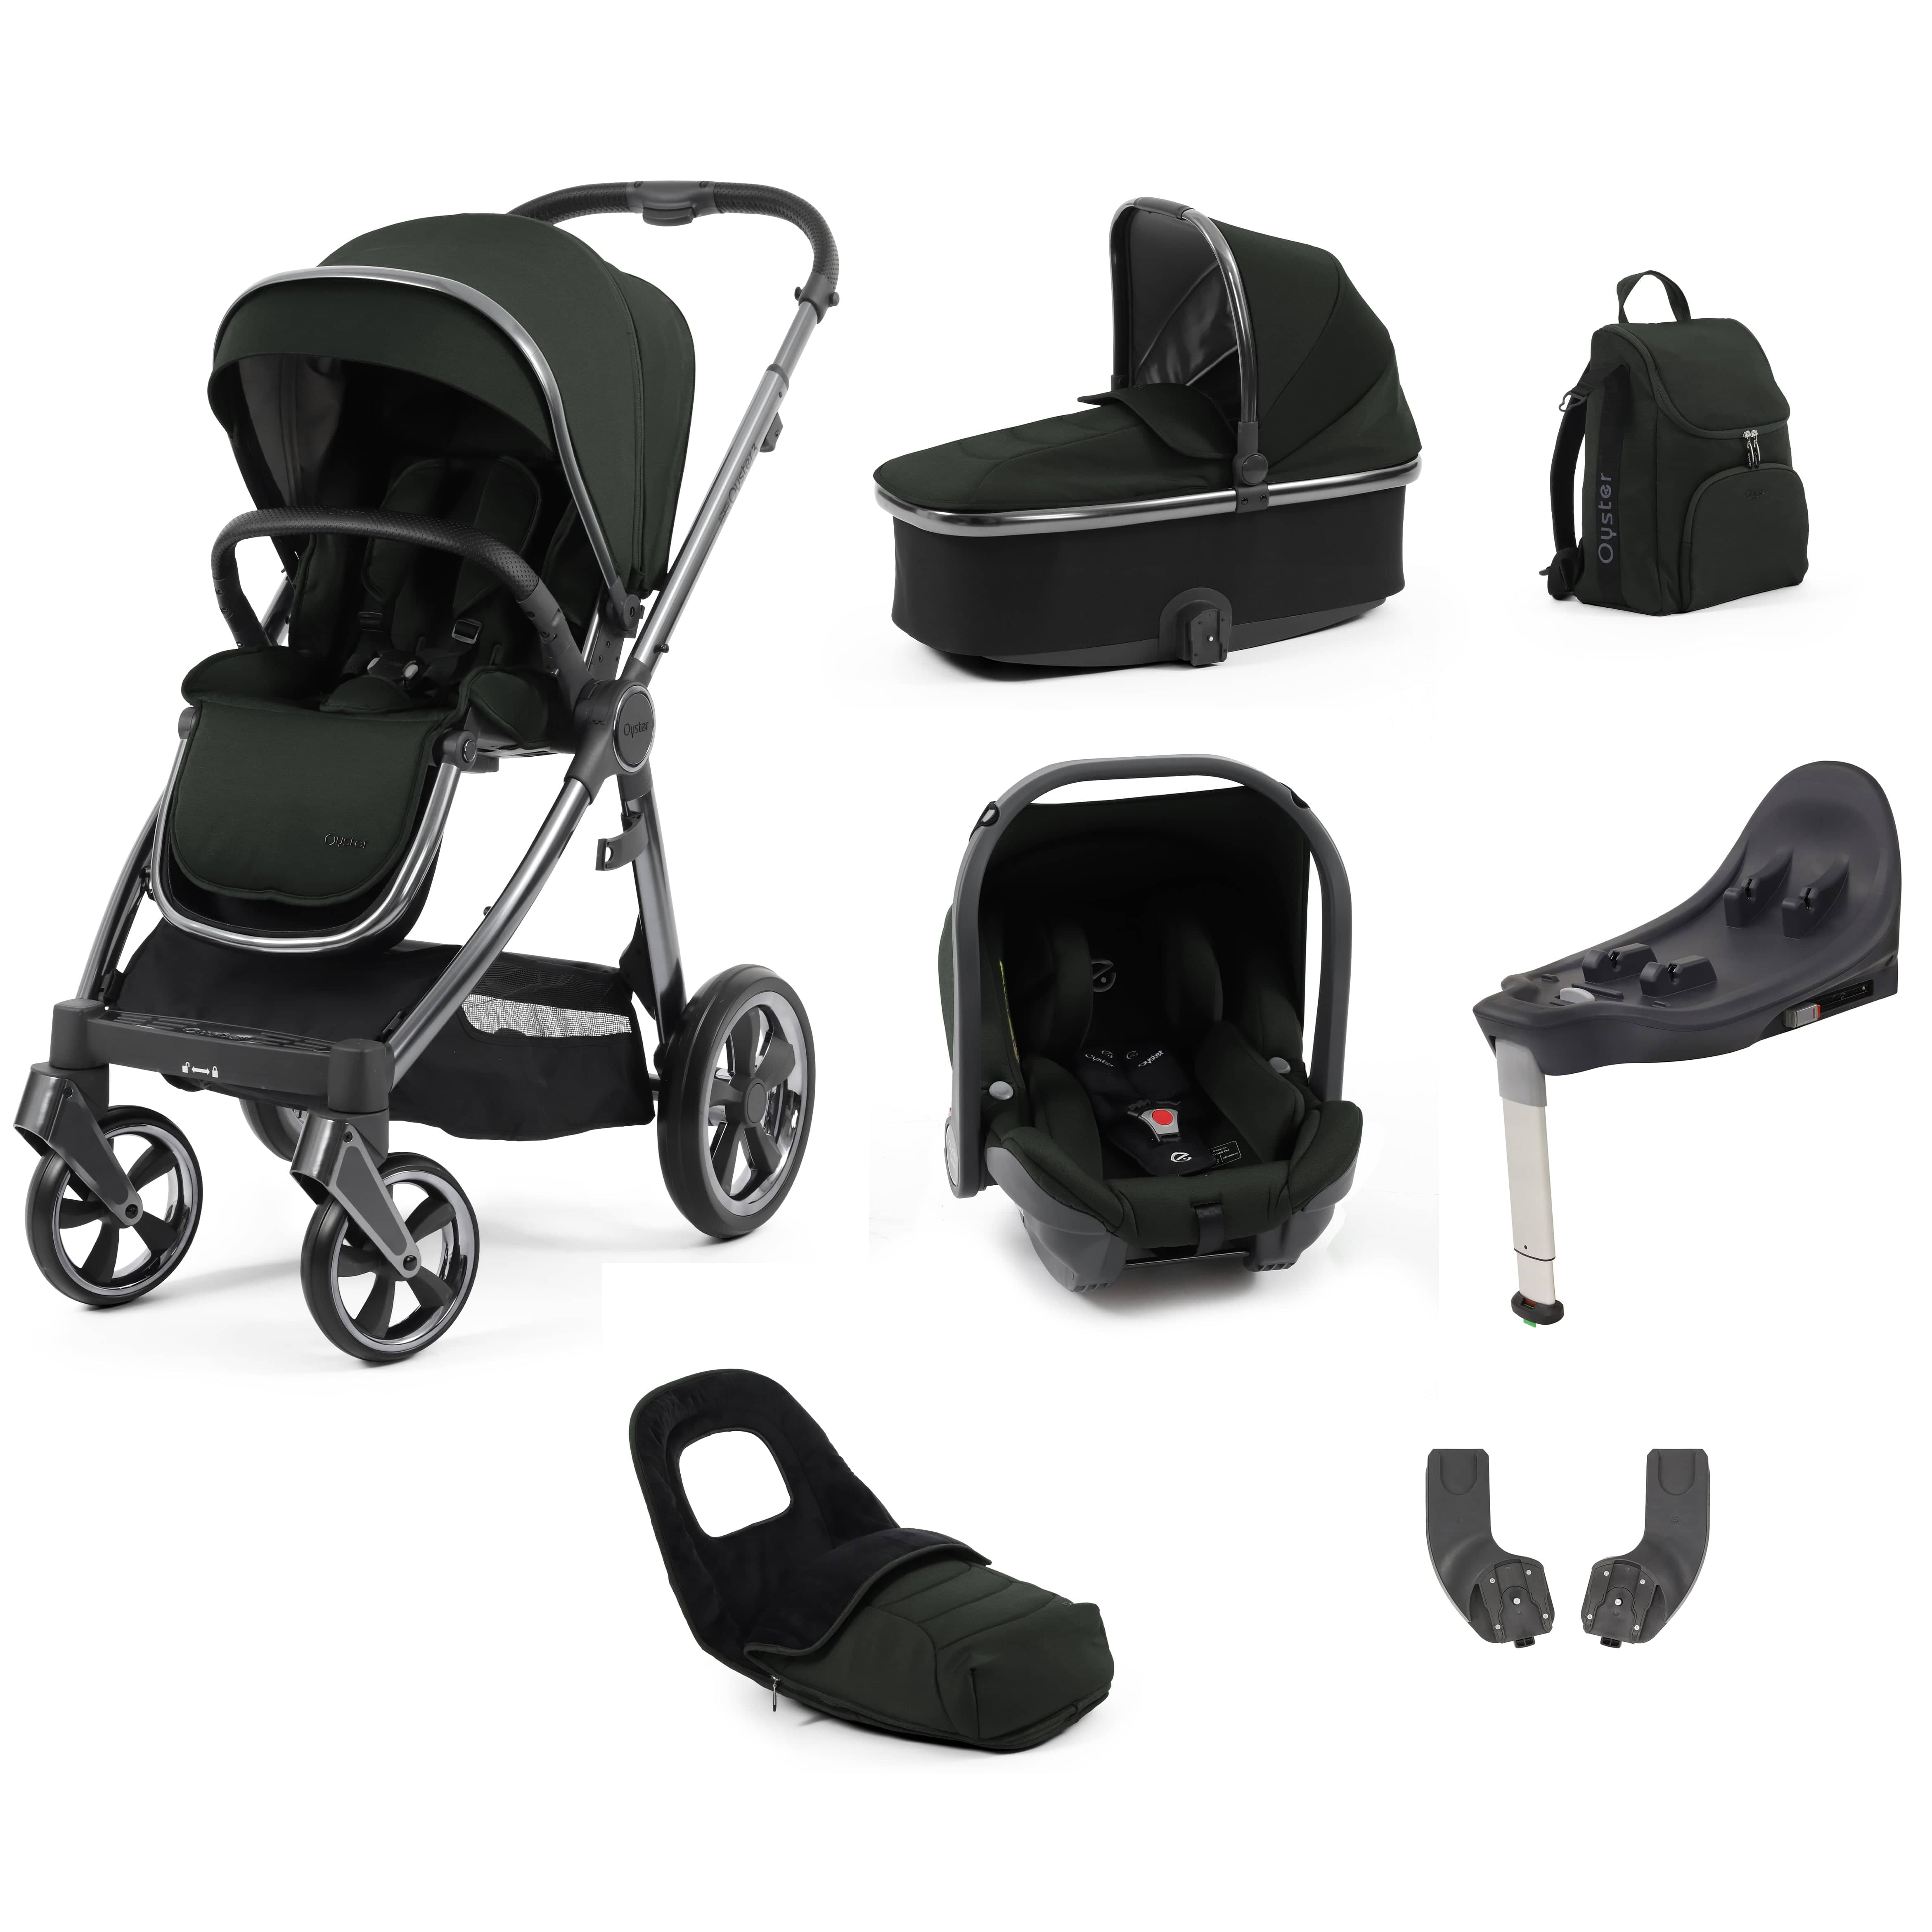 BabyStyle travel systems Babystyle Oyster 3 Luxury 7 Piece with Car Seat Bundle in Black Olive 14769-BLO